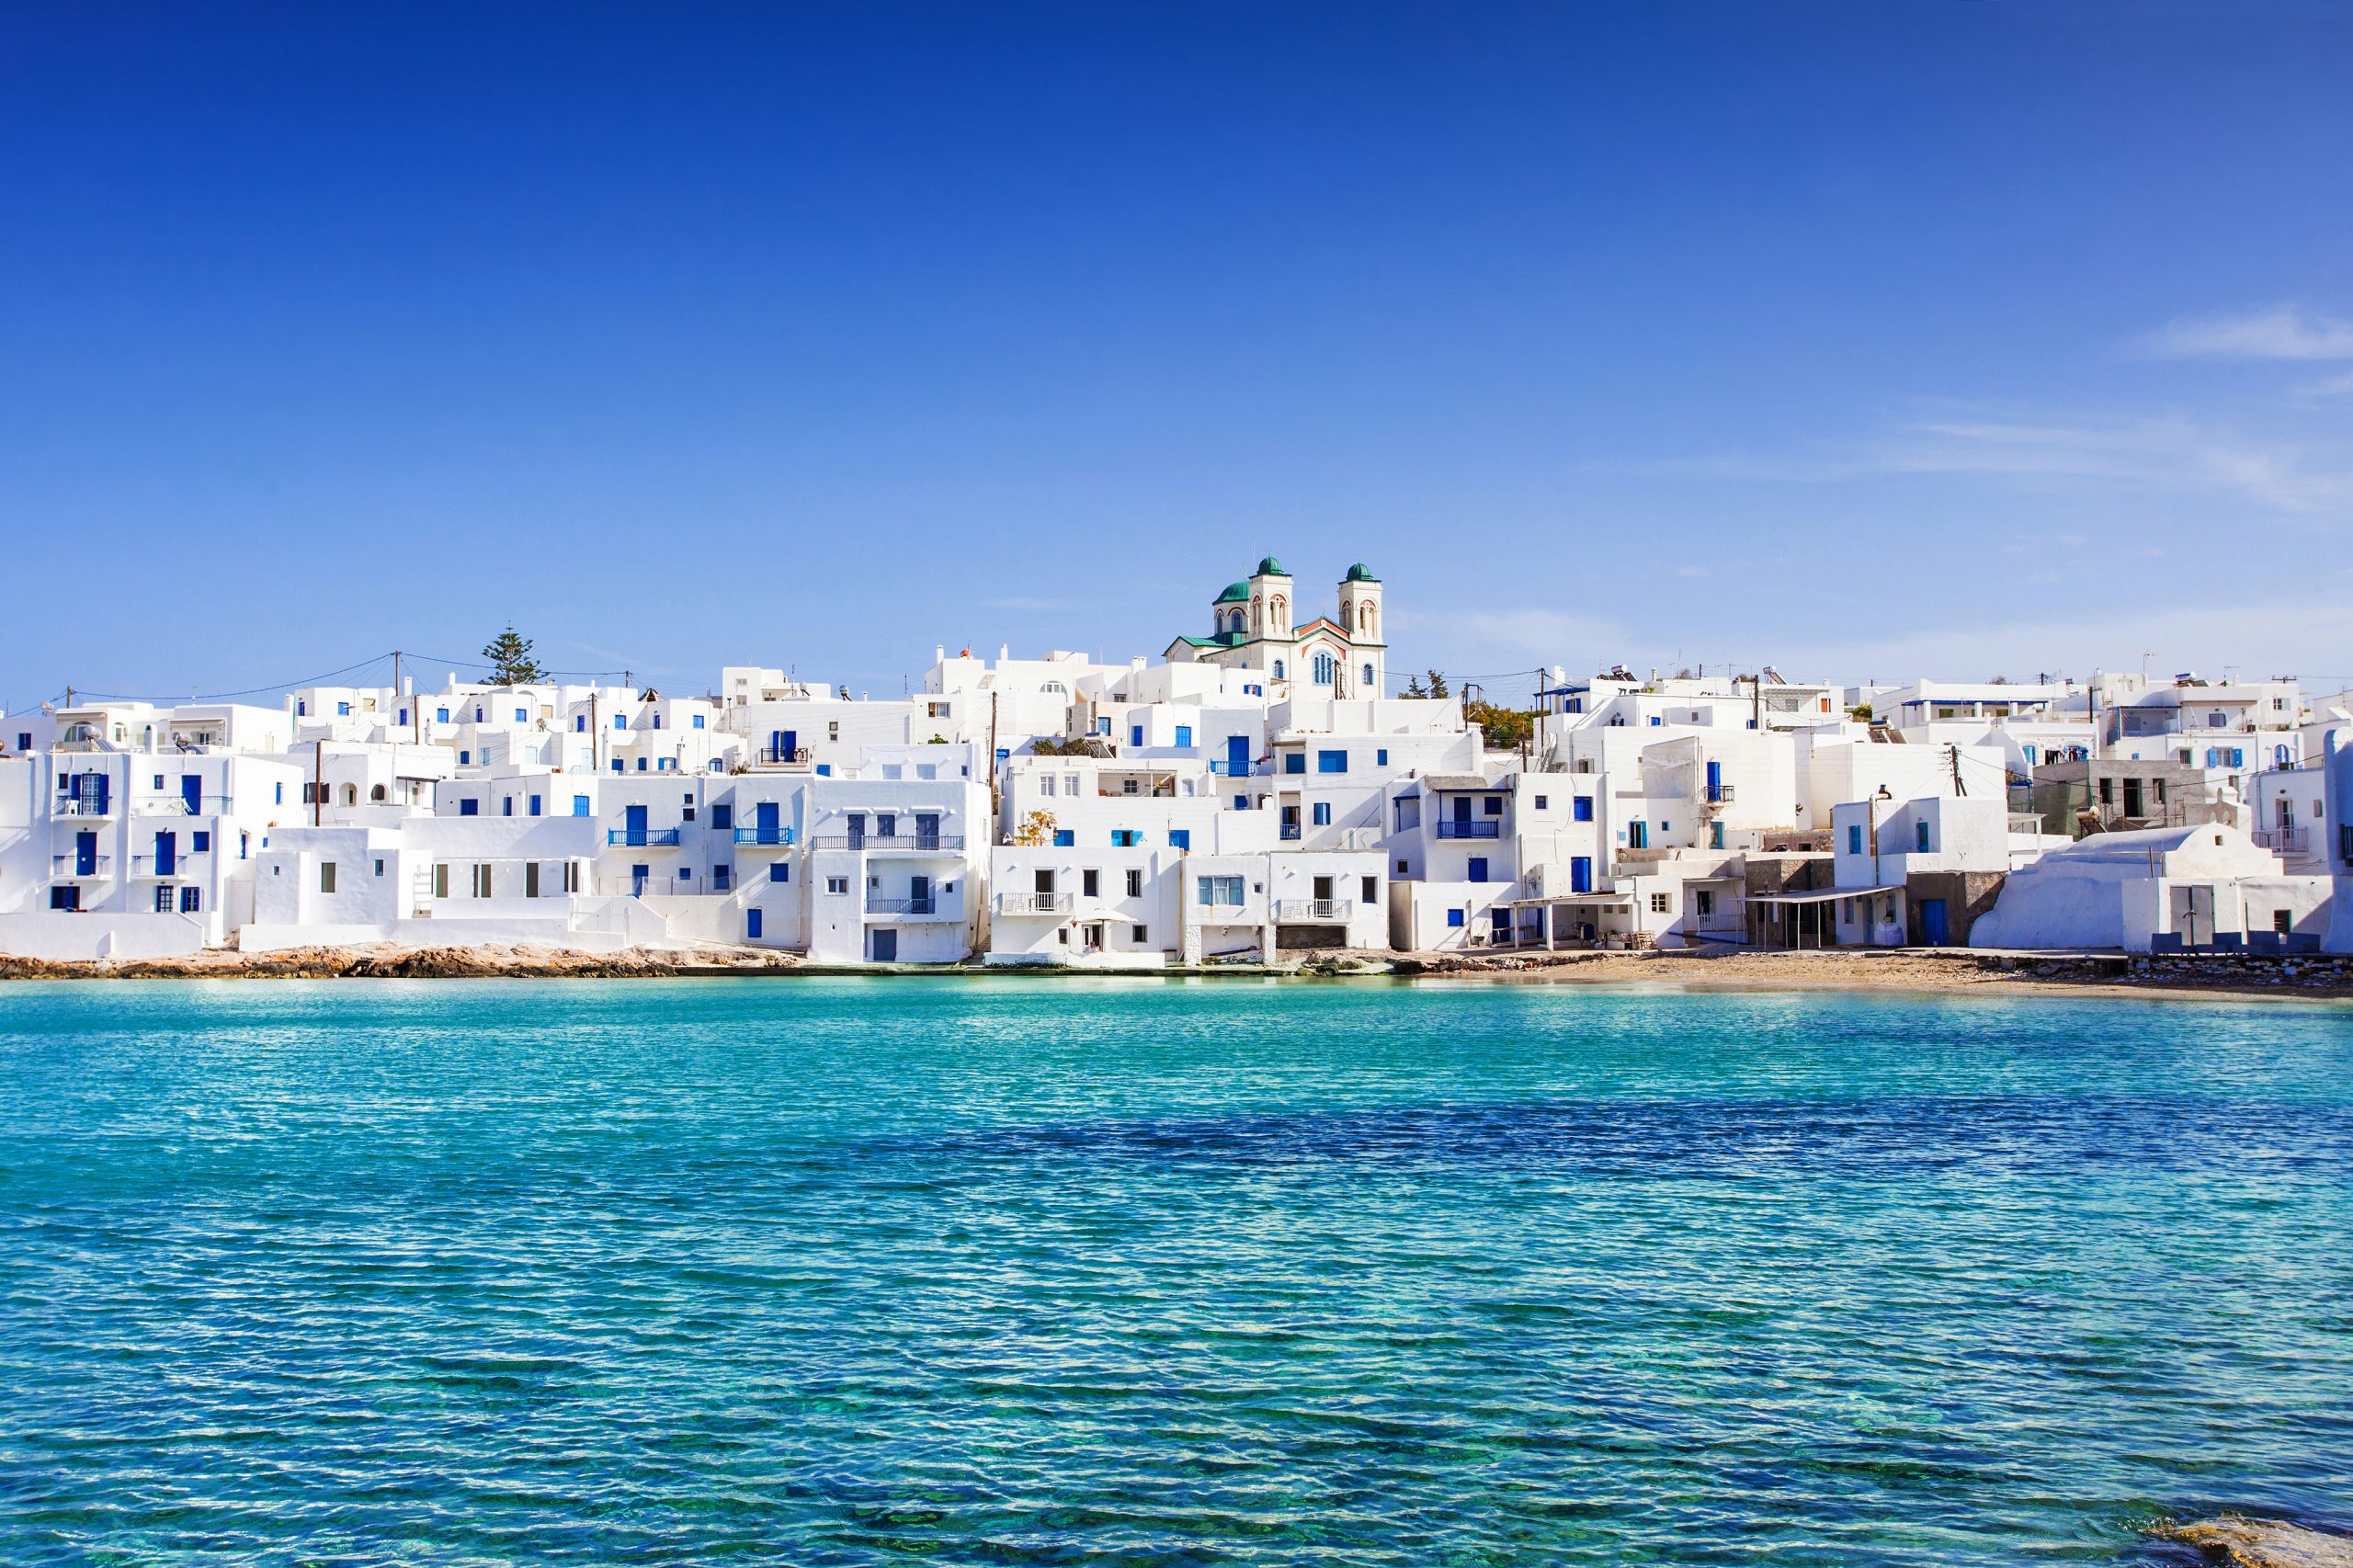 Paros: One of the most preferred tourist destinations for flights by private jets